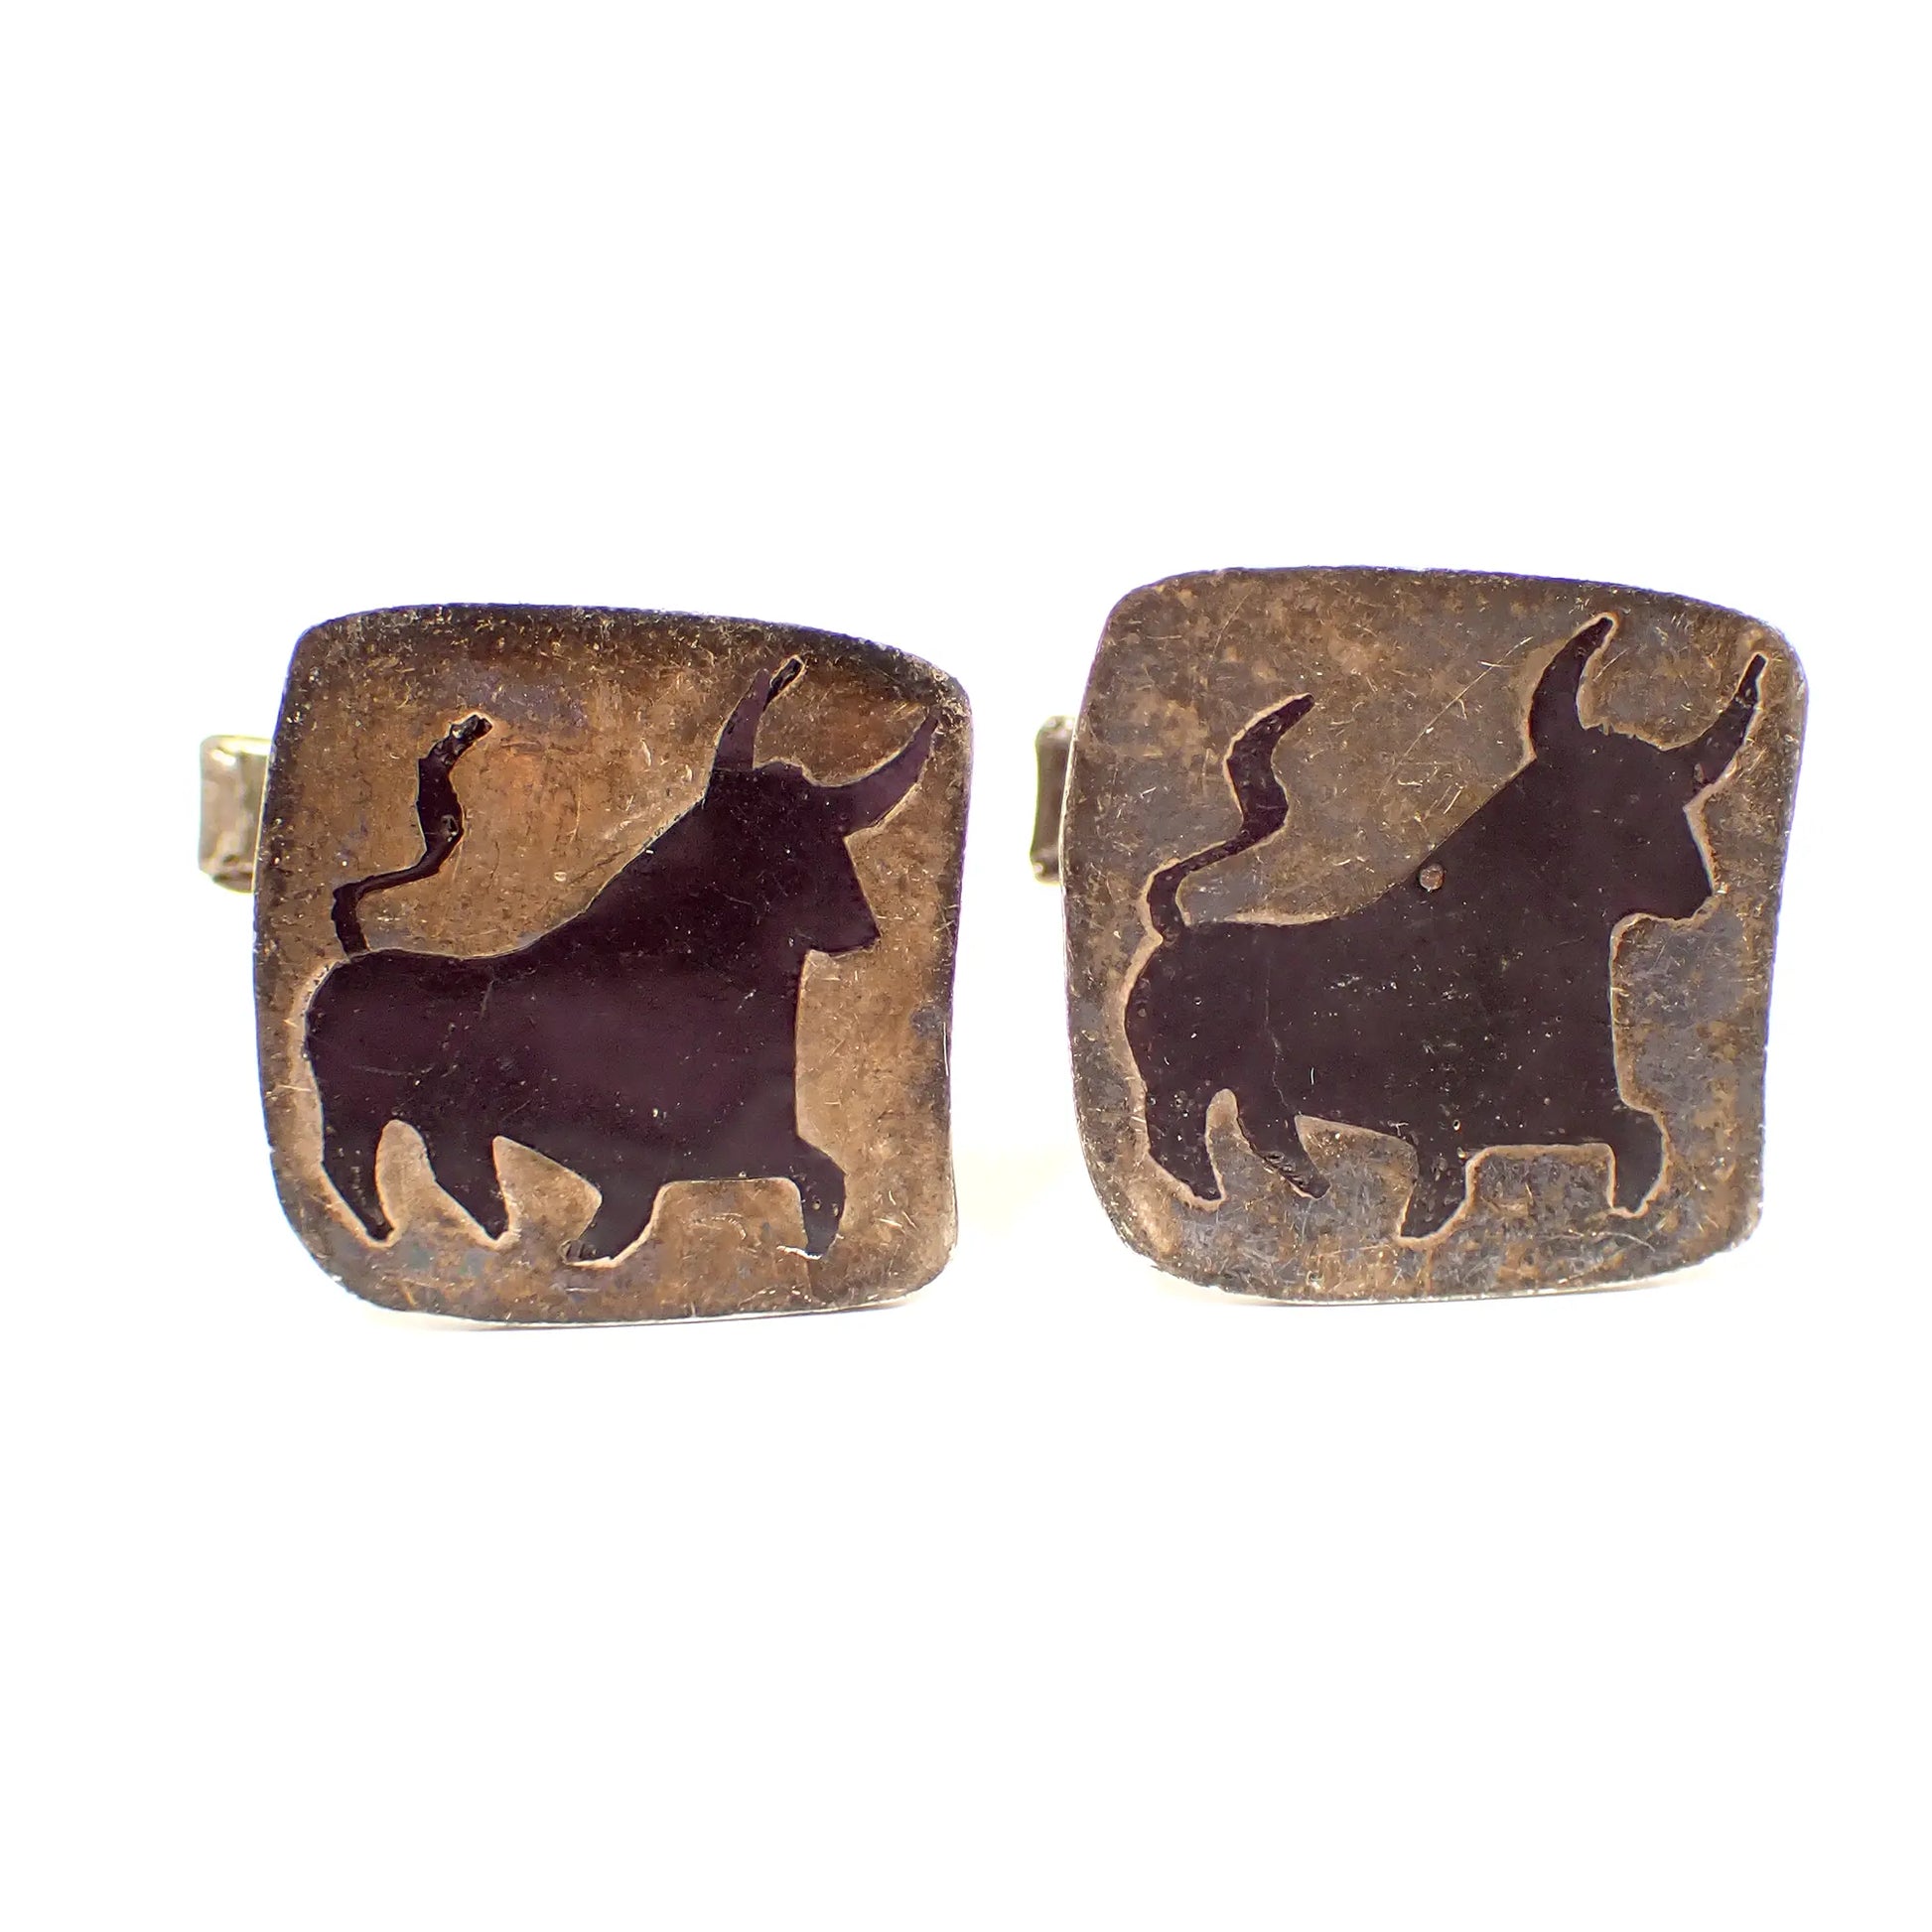 Front view of the retro vintage Taxco cufflinks. They are square in shape with rounded corners. They are a dark gray in color with a black bull design in the middle. 